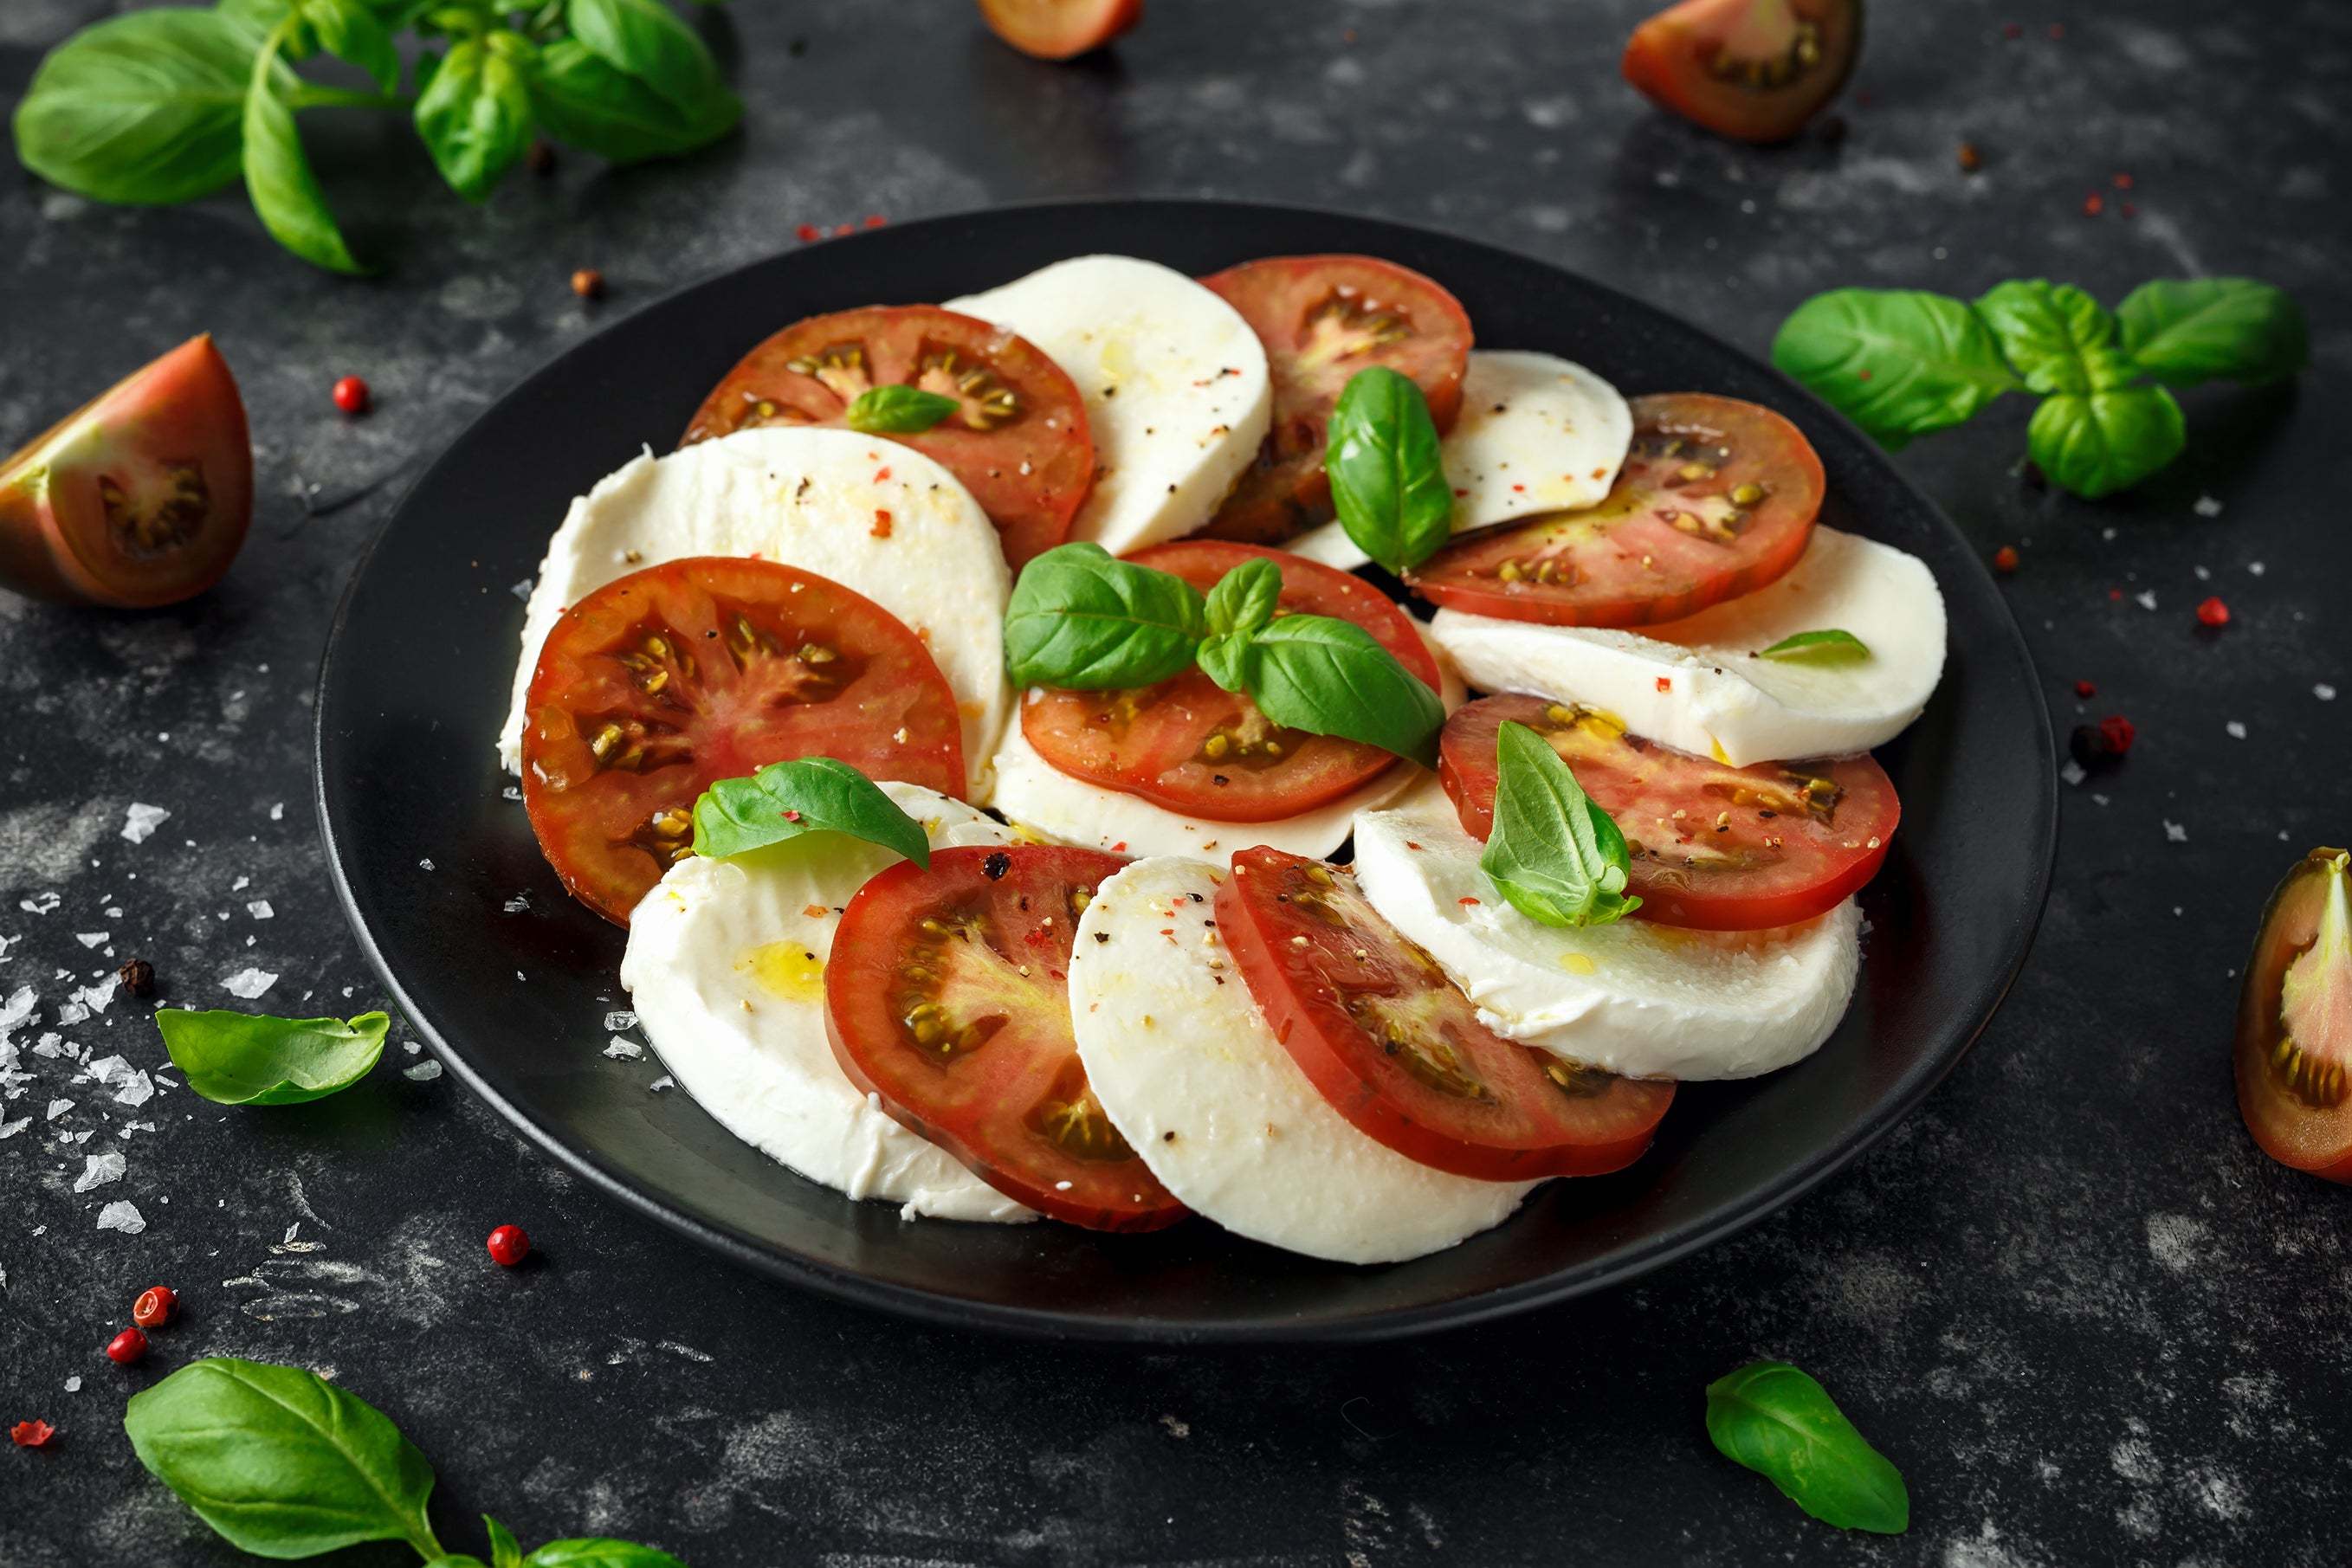 Caprese Salad is a classic Italian salad made with fresh mozzarella, sliced tomatoes, and basil leaves. 